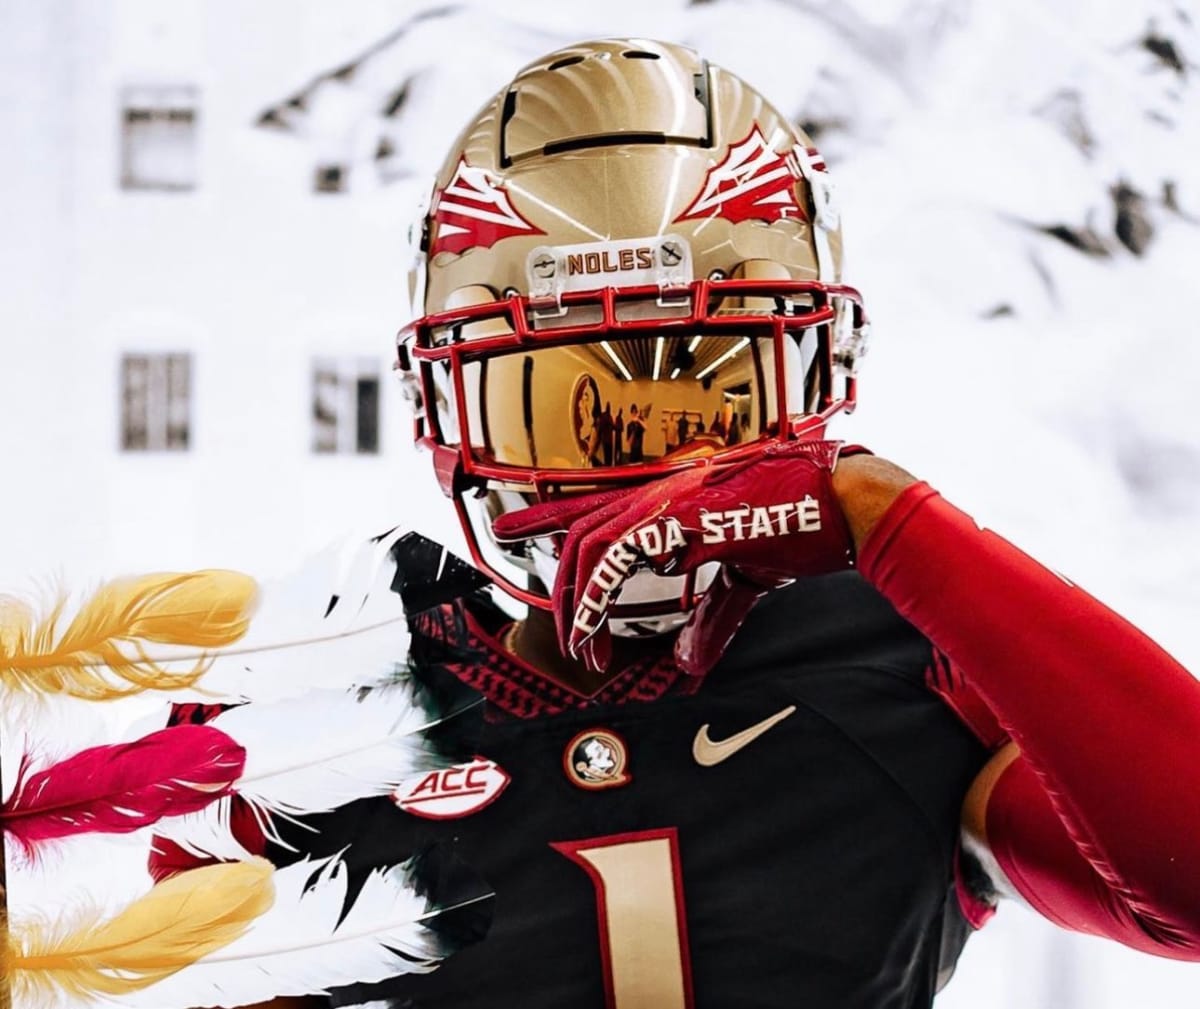 Cai Bates, 4-star defensive back, commits to Florida State